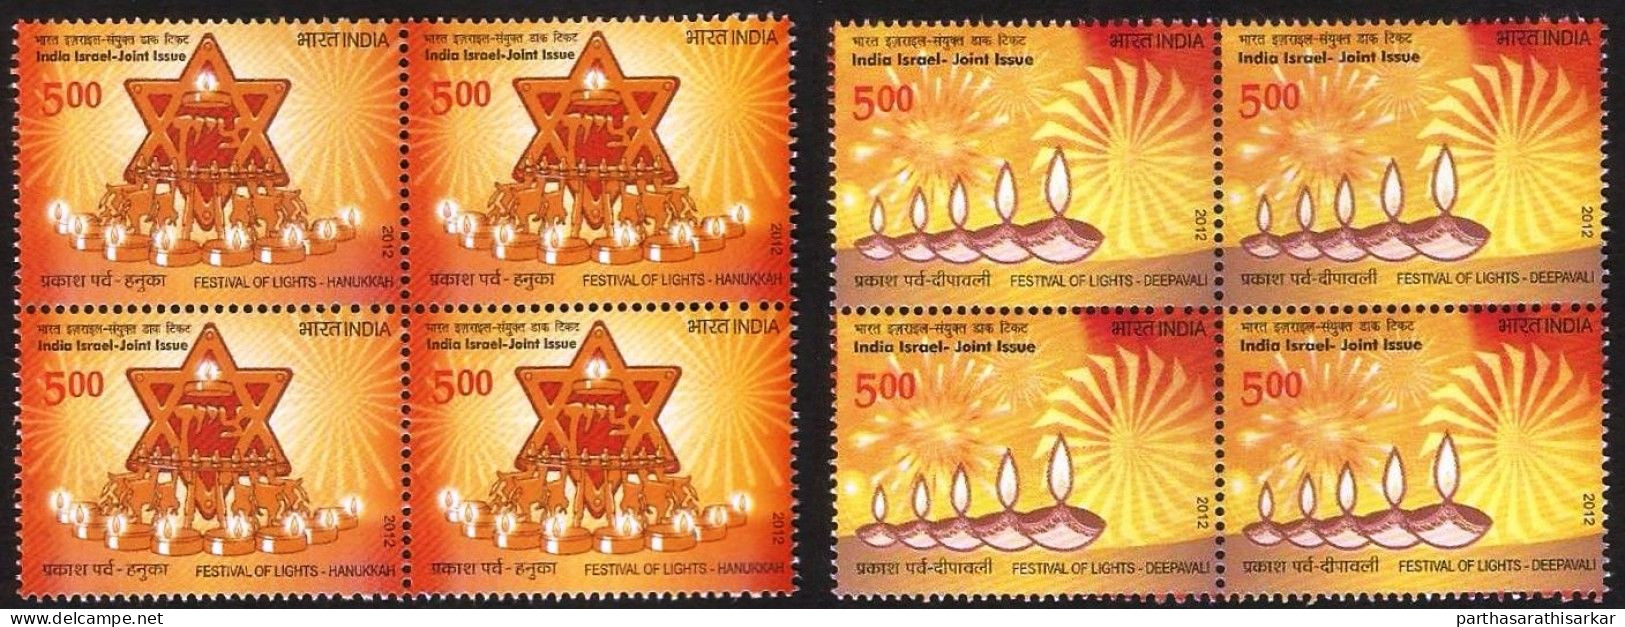 INDIA 2012 FESTIVAL OF LIGHTS JOINT ISSUE WITH ISRAEL COMPLETE SET BLOCK OF 4 MNH RARE - Nuovi